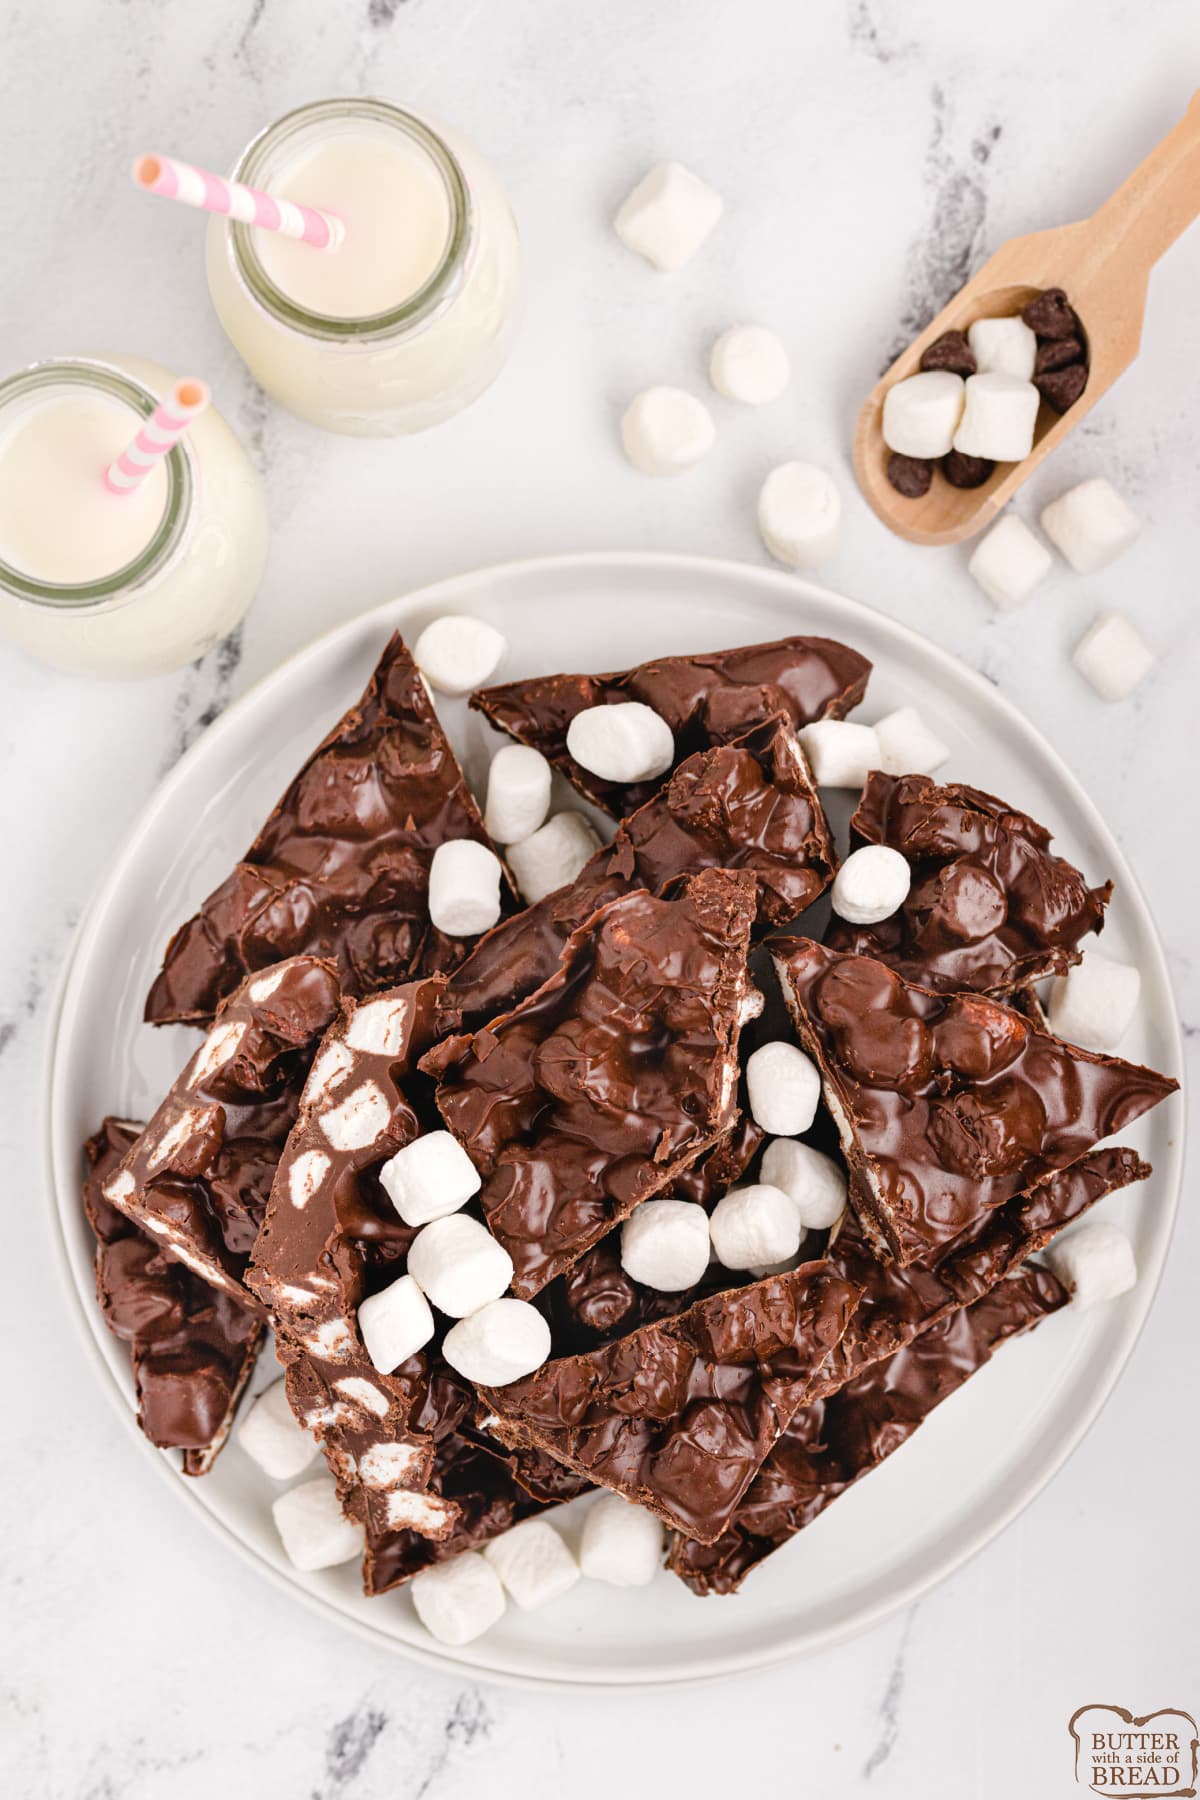 Marshmallow Peanut Butter Chocolate Bark is made with only 3 ingredients in just a few minutes. Simple chocolate candy recipe that is easy to make and is perfect for parties and gift giving.